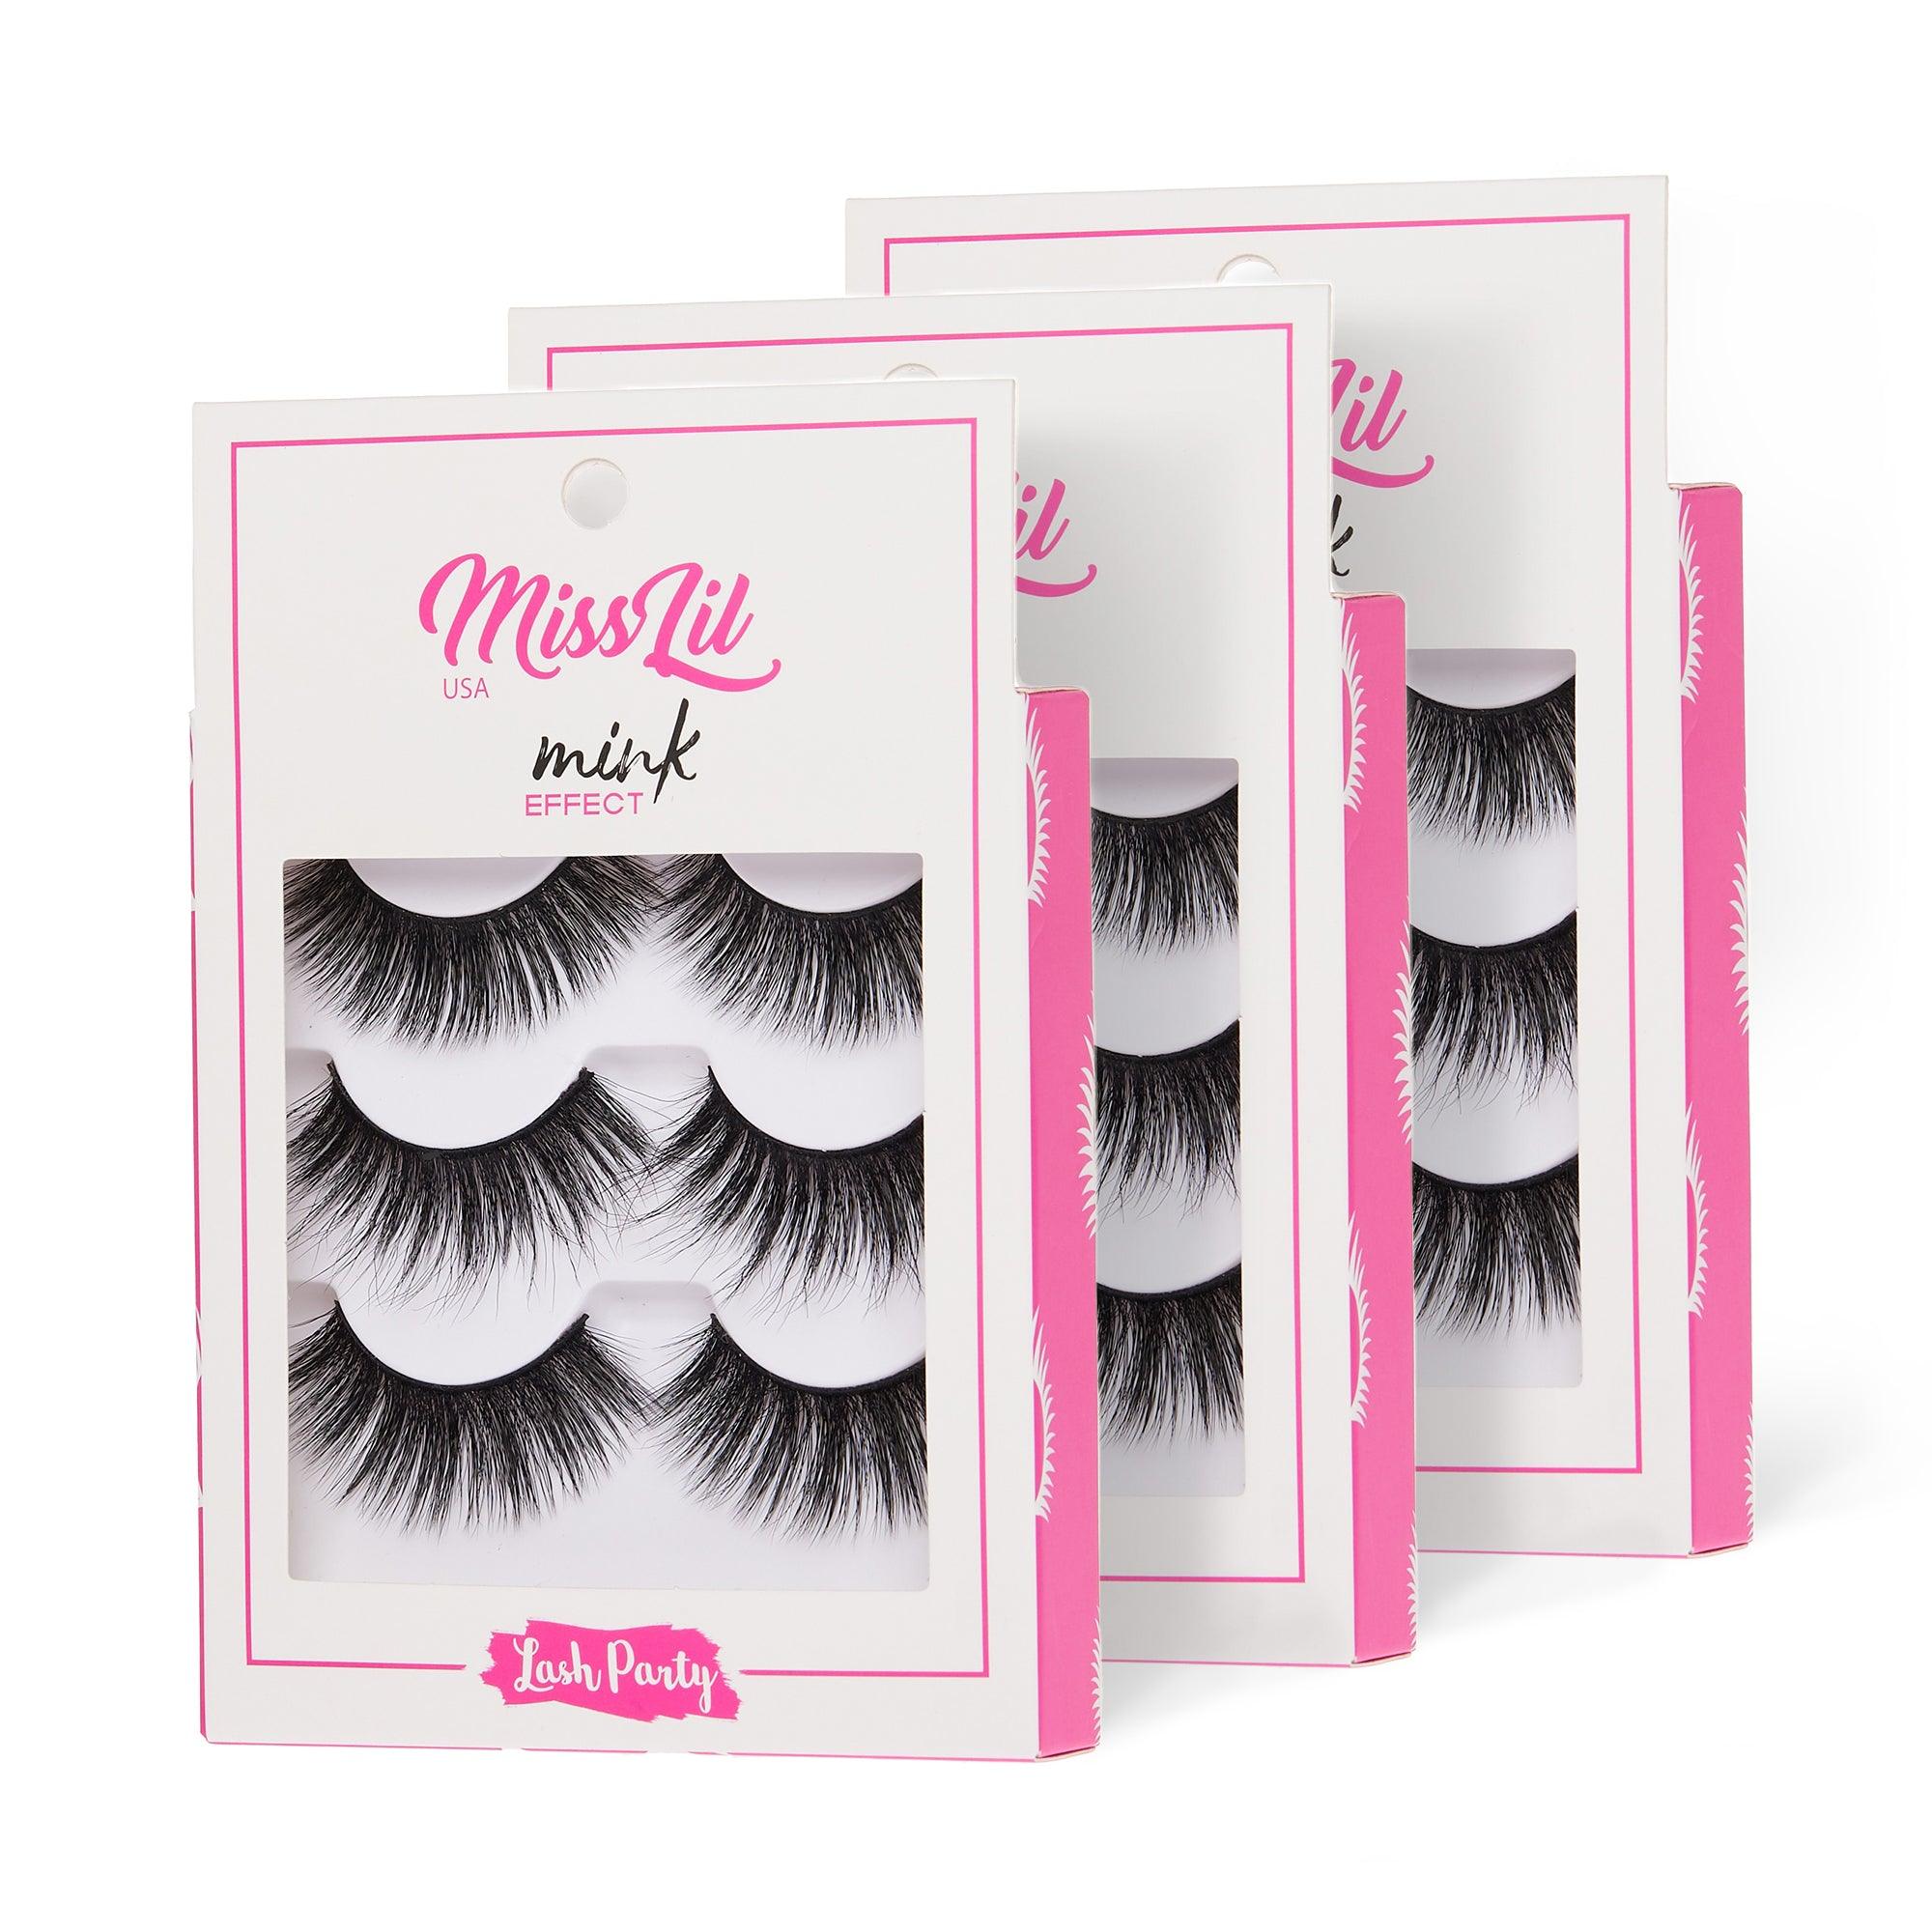 3-Pair Faux Mink Effect Eyelashes - Lash Party Collection #12 - Pack of 3 - Miss Lil USA